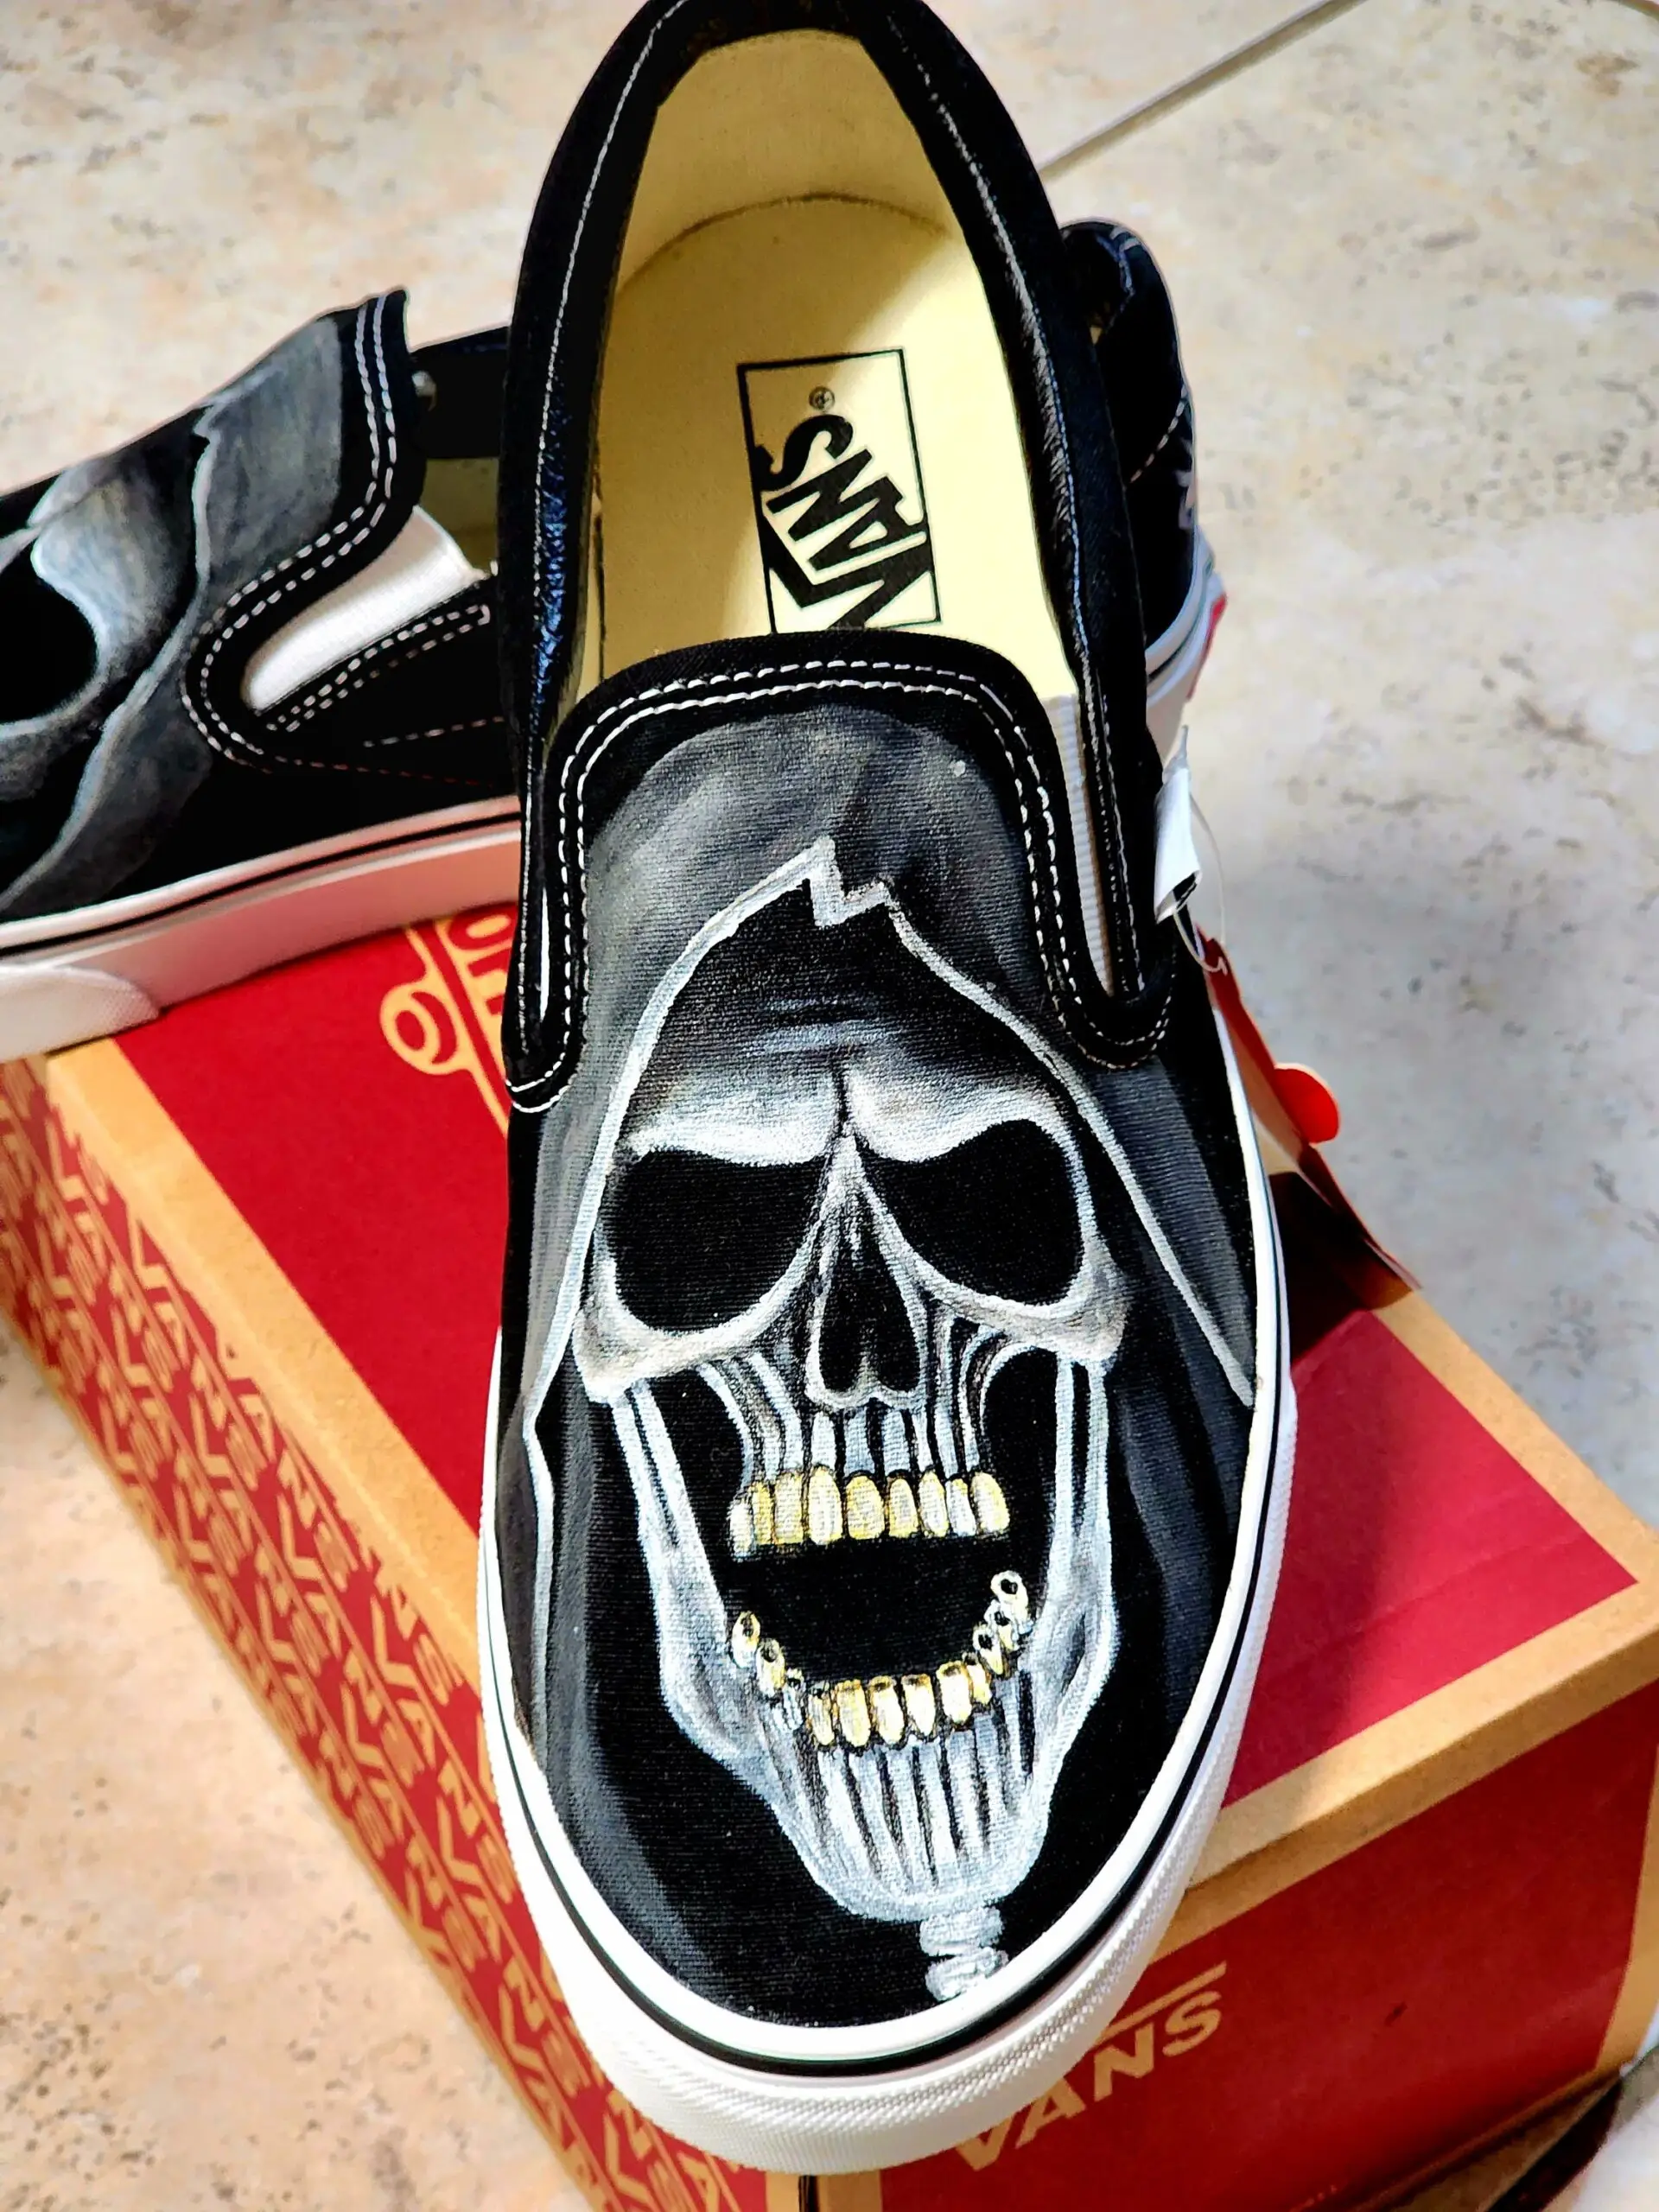 Handpainted vans with the design of a grim reaper. Textile paint. Washer and dryer safe. Size: 11 US Men